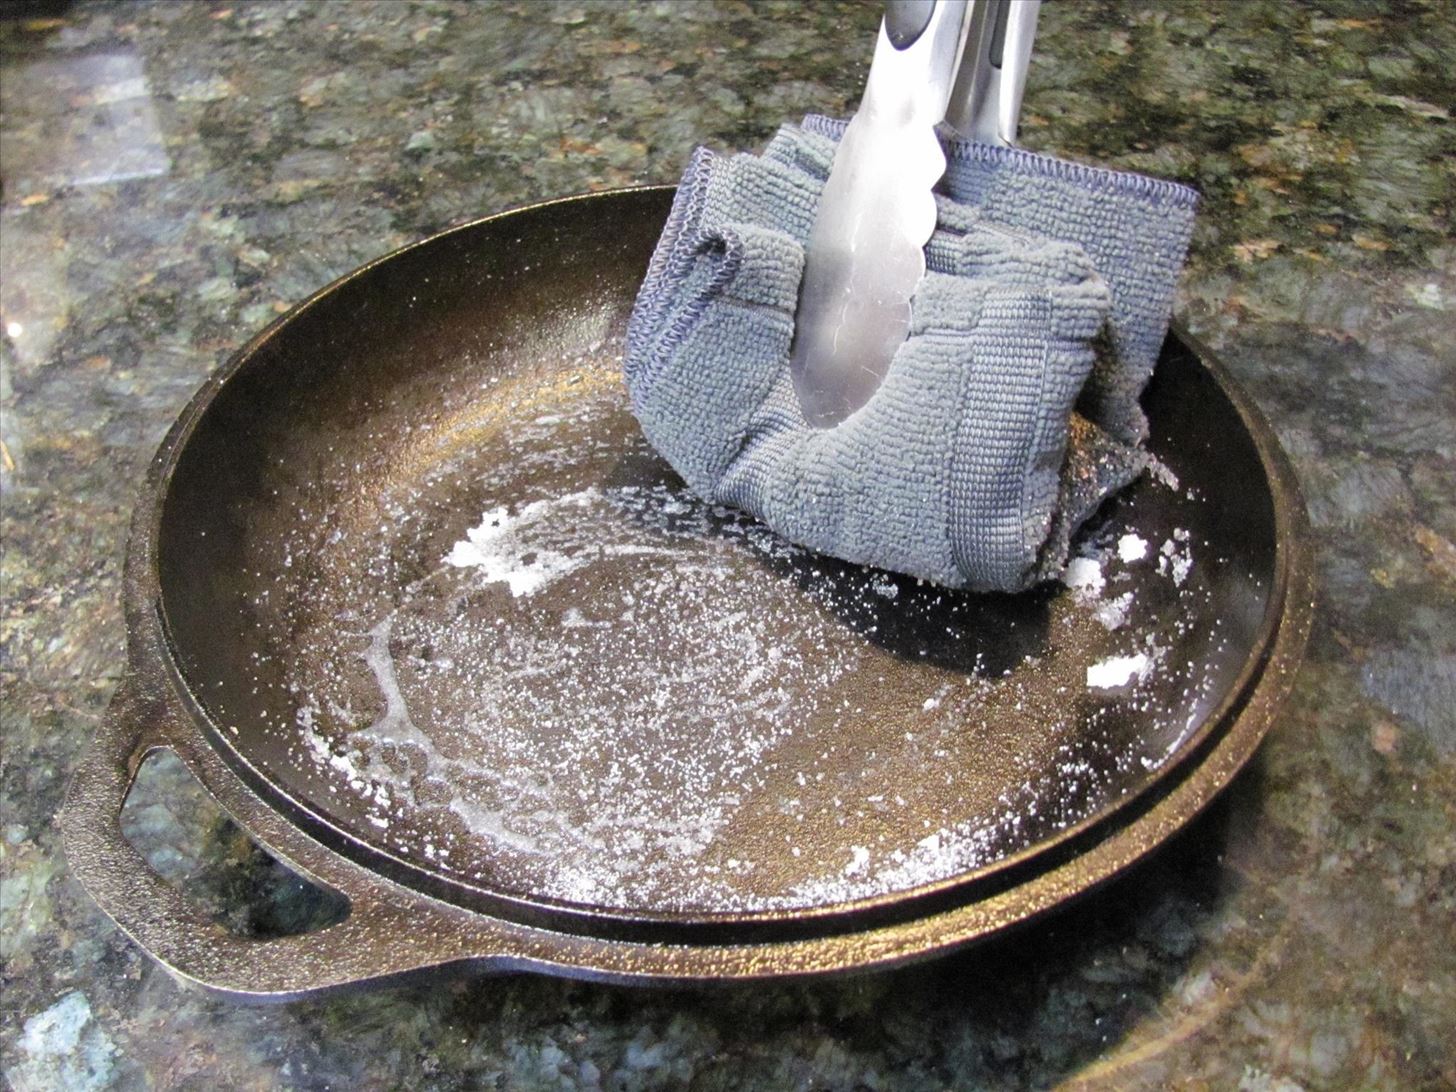 https://img.wonderhowto.com/img/92/88/63527388551256/0/10-key-things-everyone-should-know-about-seasoning-cleaning-maintaining-cast-iron-pans.w1456.jpg